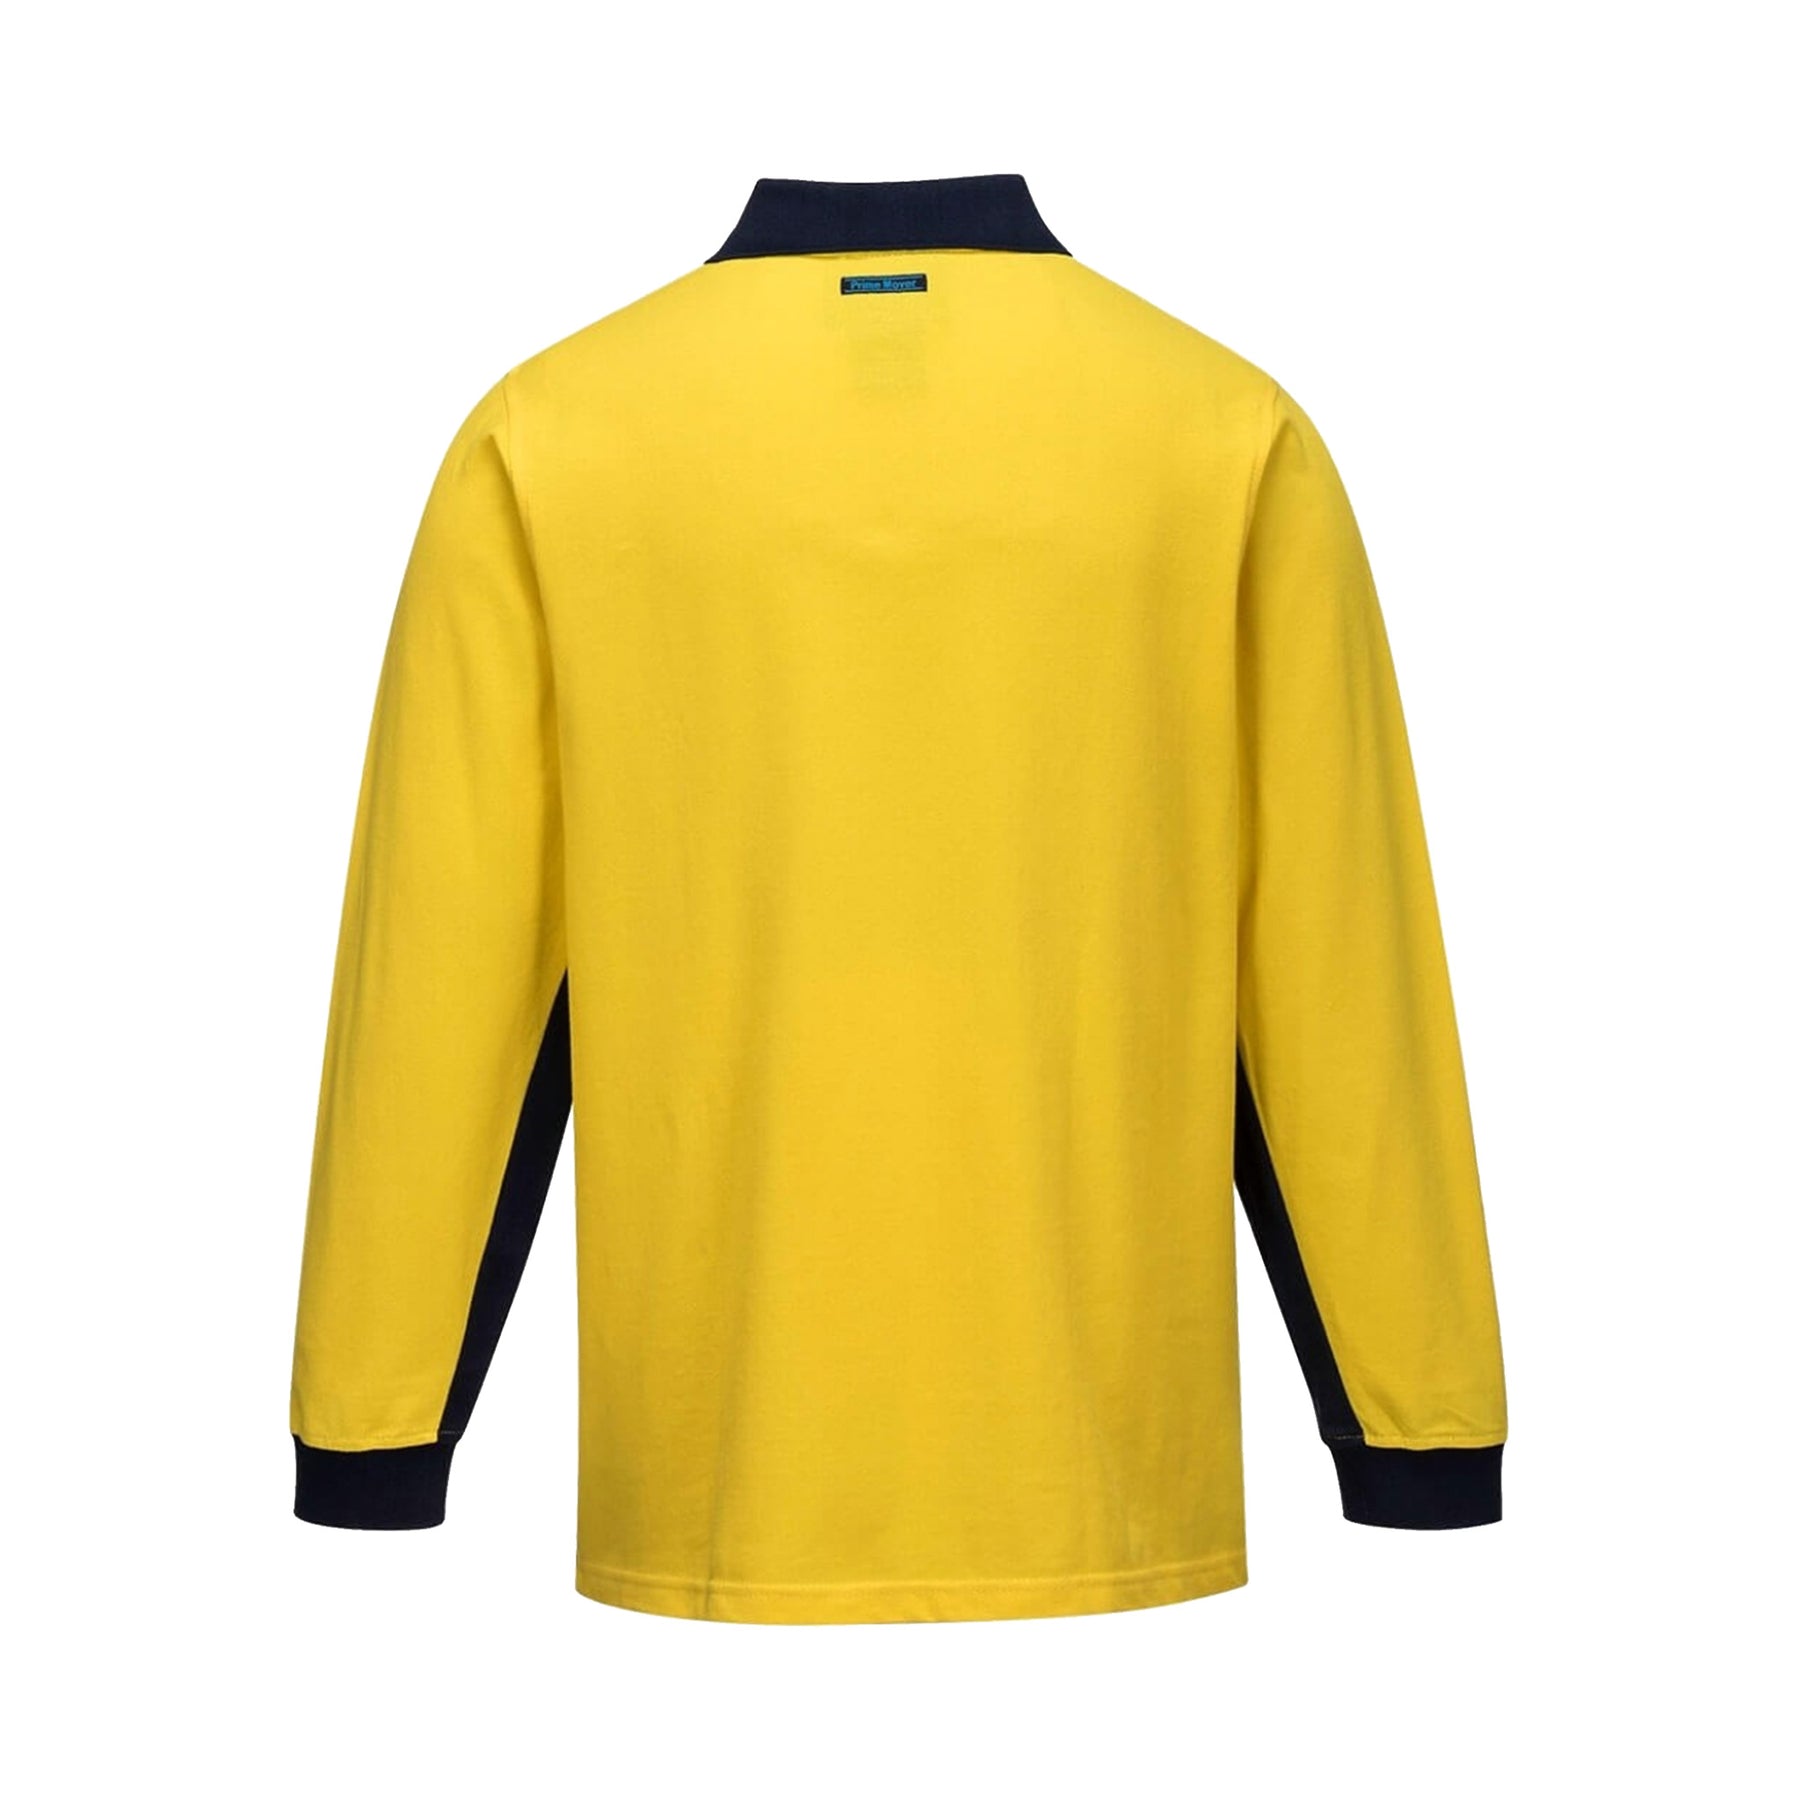 long sleeve cotton polo shirt in yellow navy back view